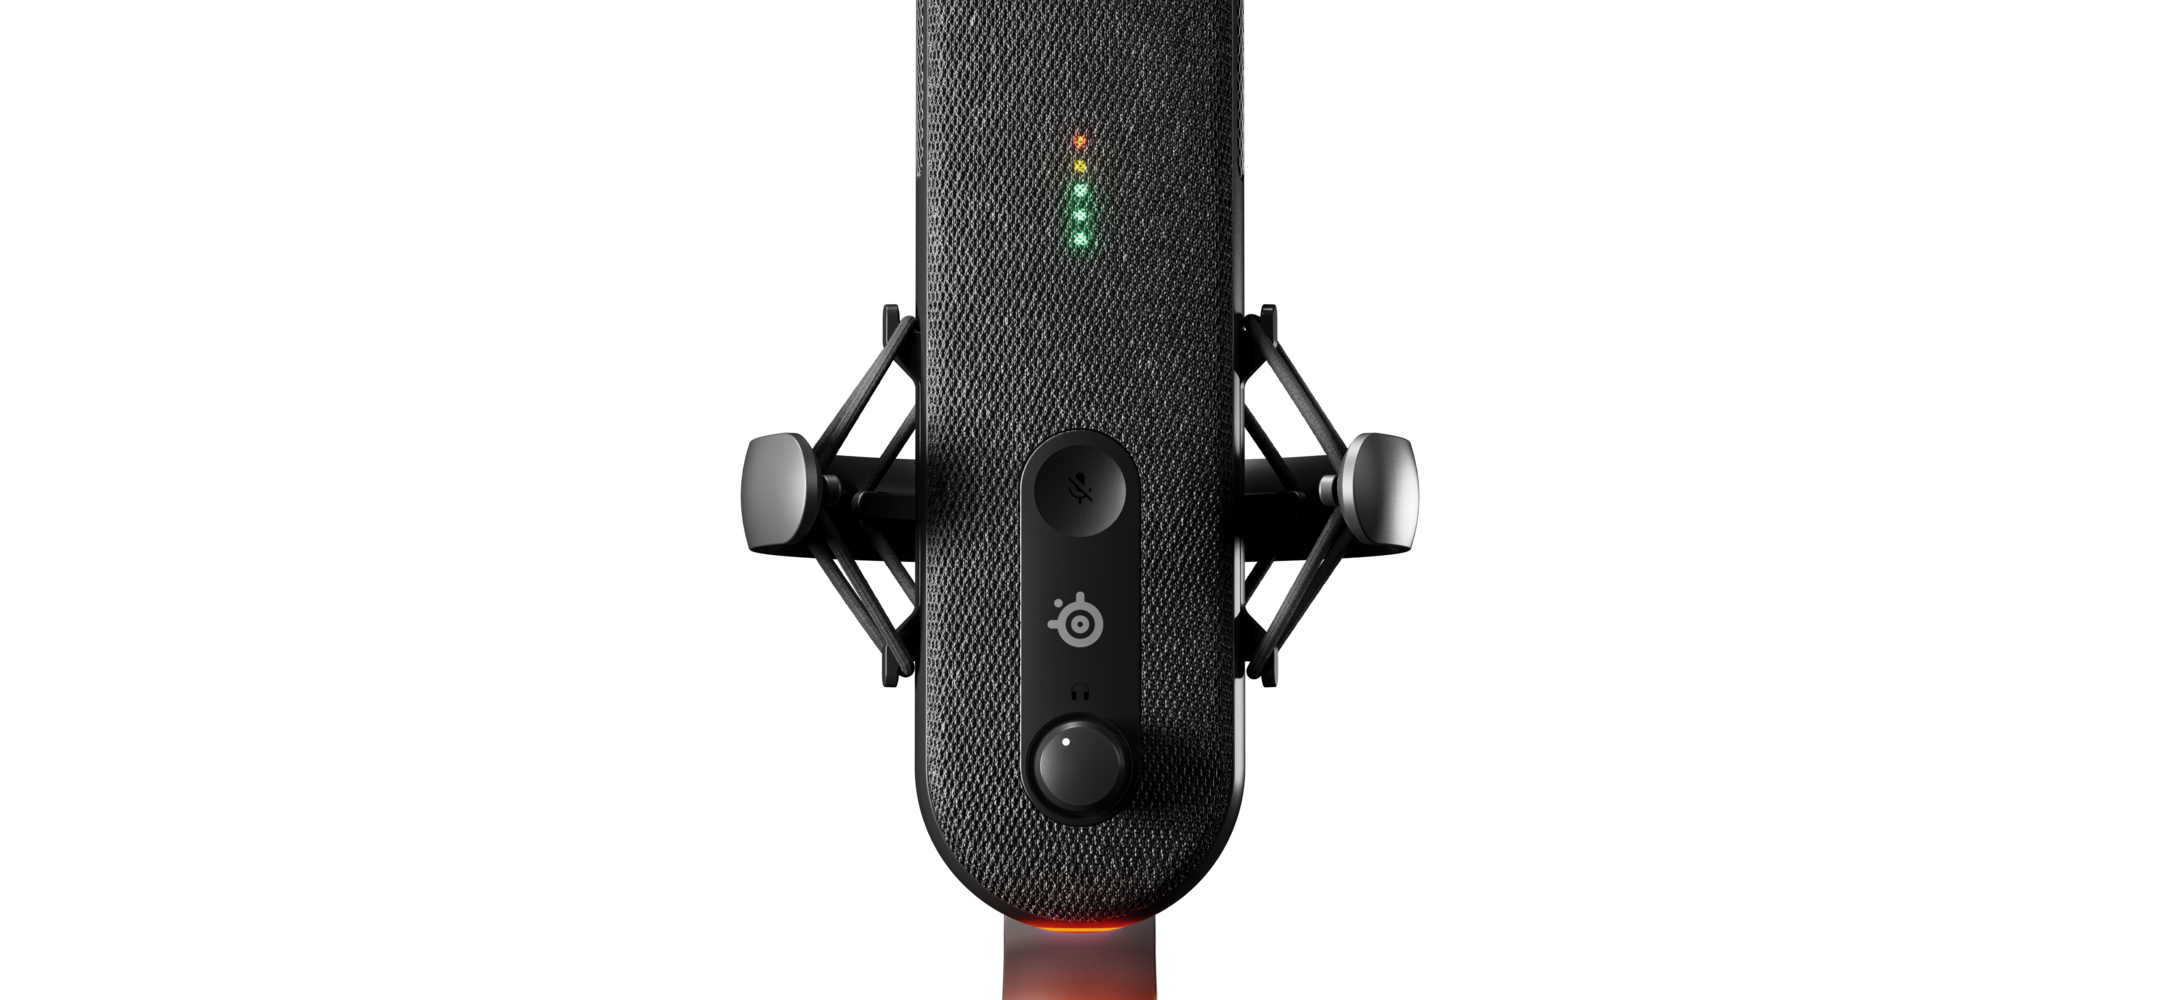 SteelSeries Unveils Game-Changing Dedicated Streaming Microphone for Gamers